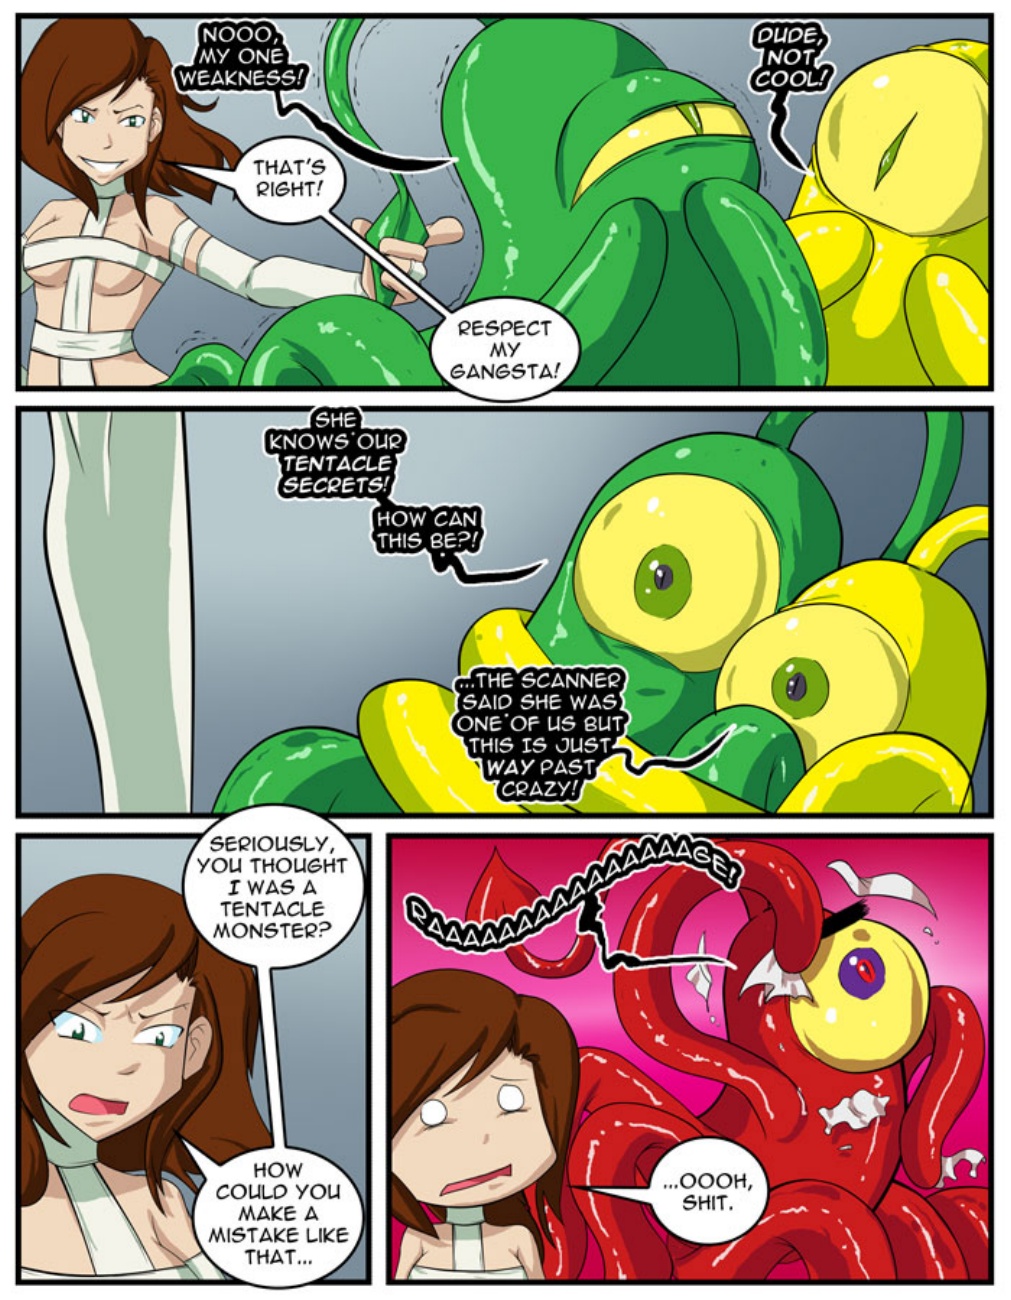 A Date With A Tentacle Monster 6 Part 2